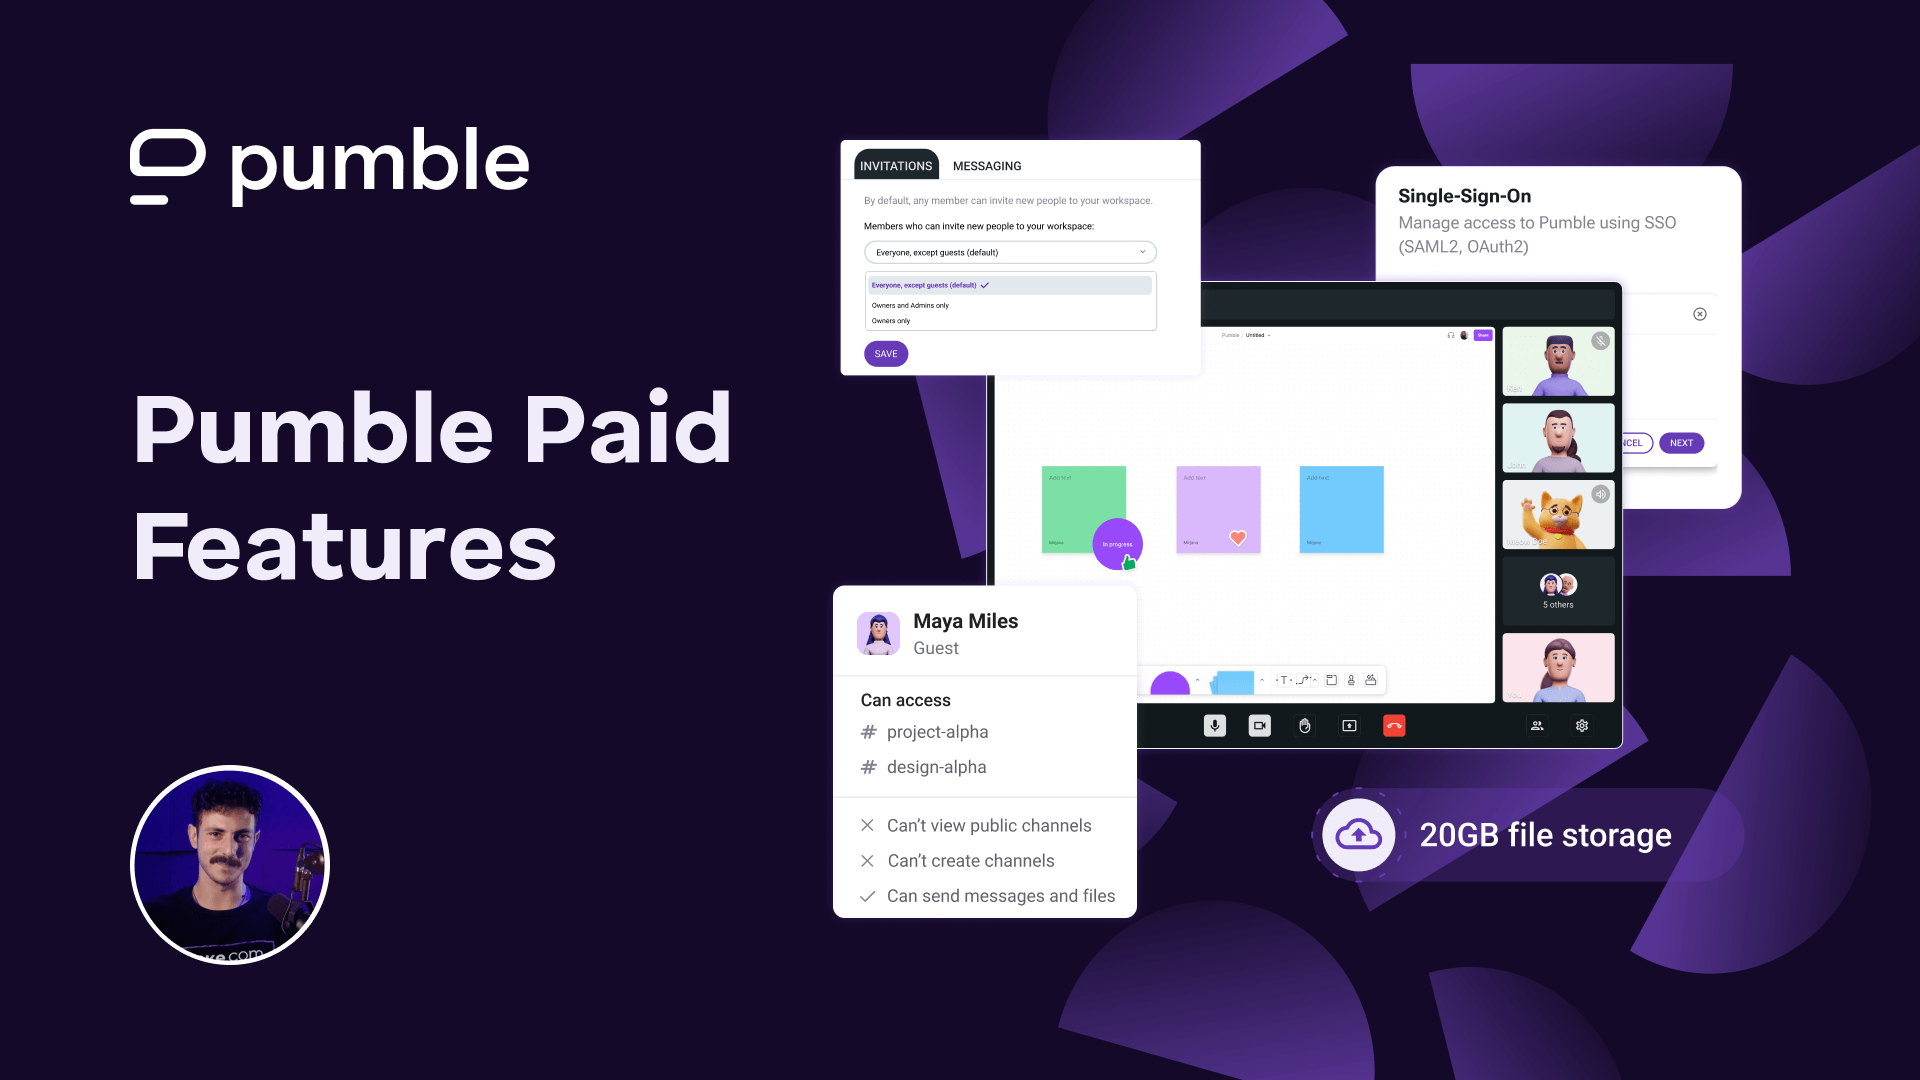 Pumble Paid features overview